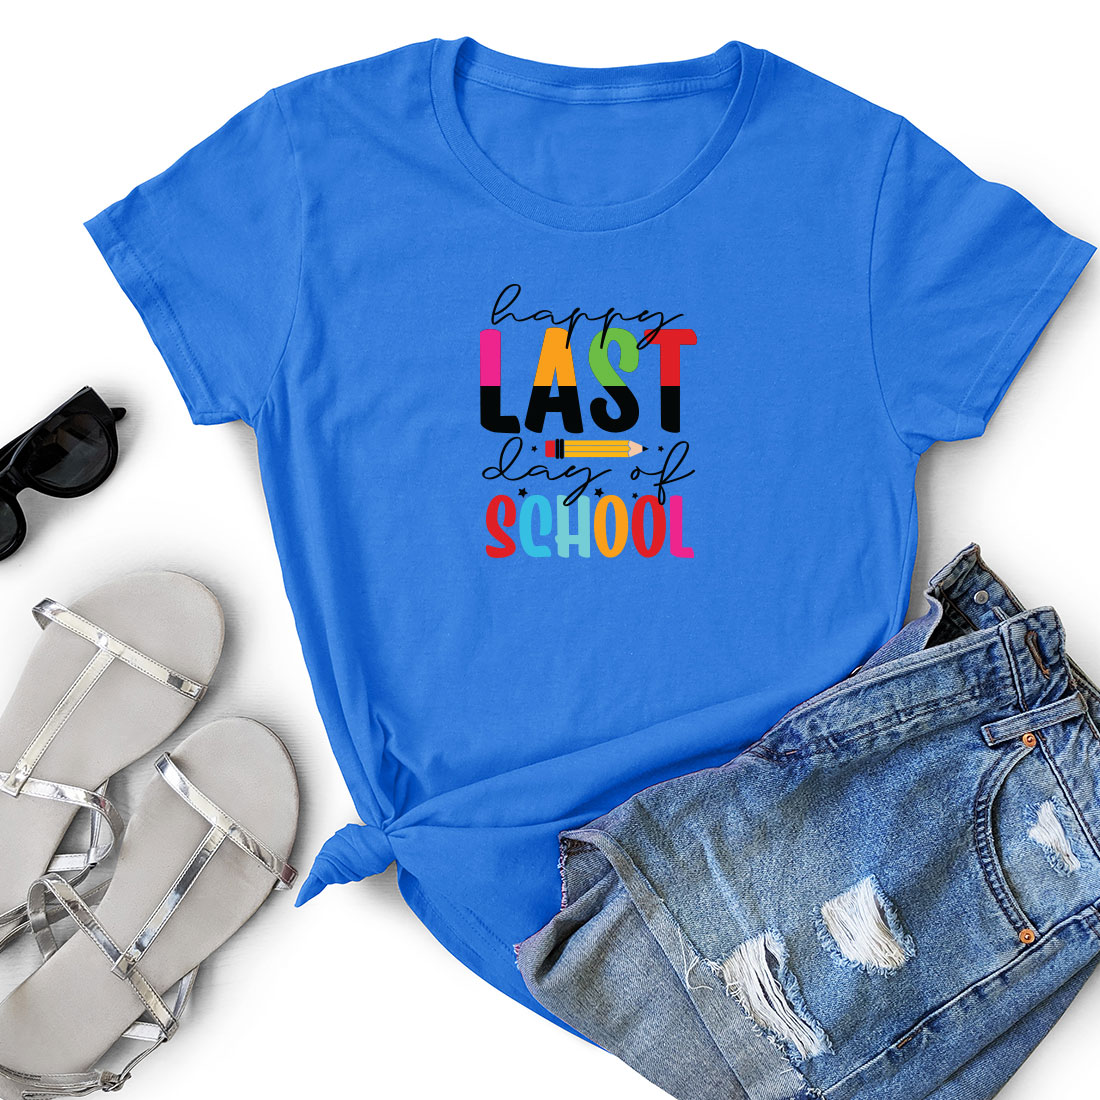 Blue t - shirt that says last day of school next to a pair of.